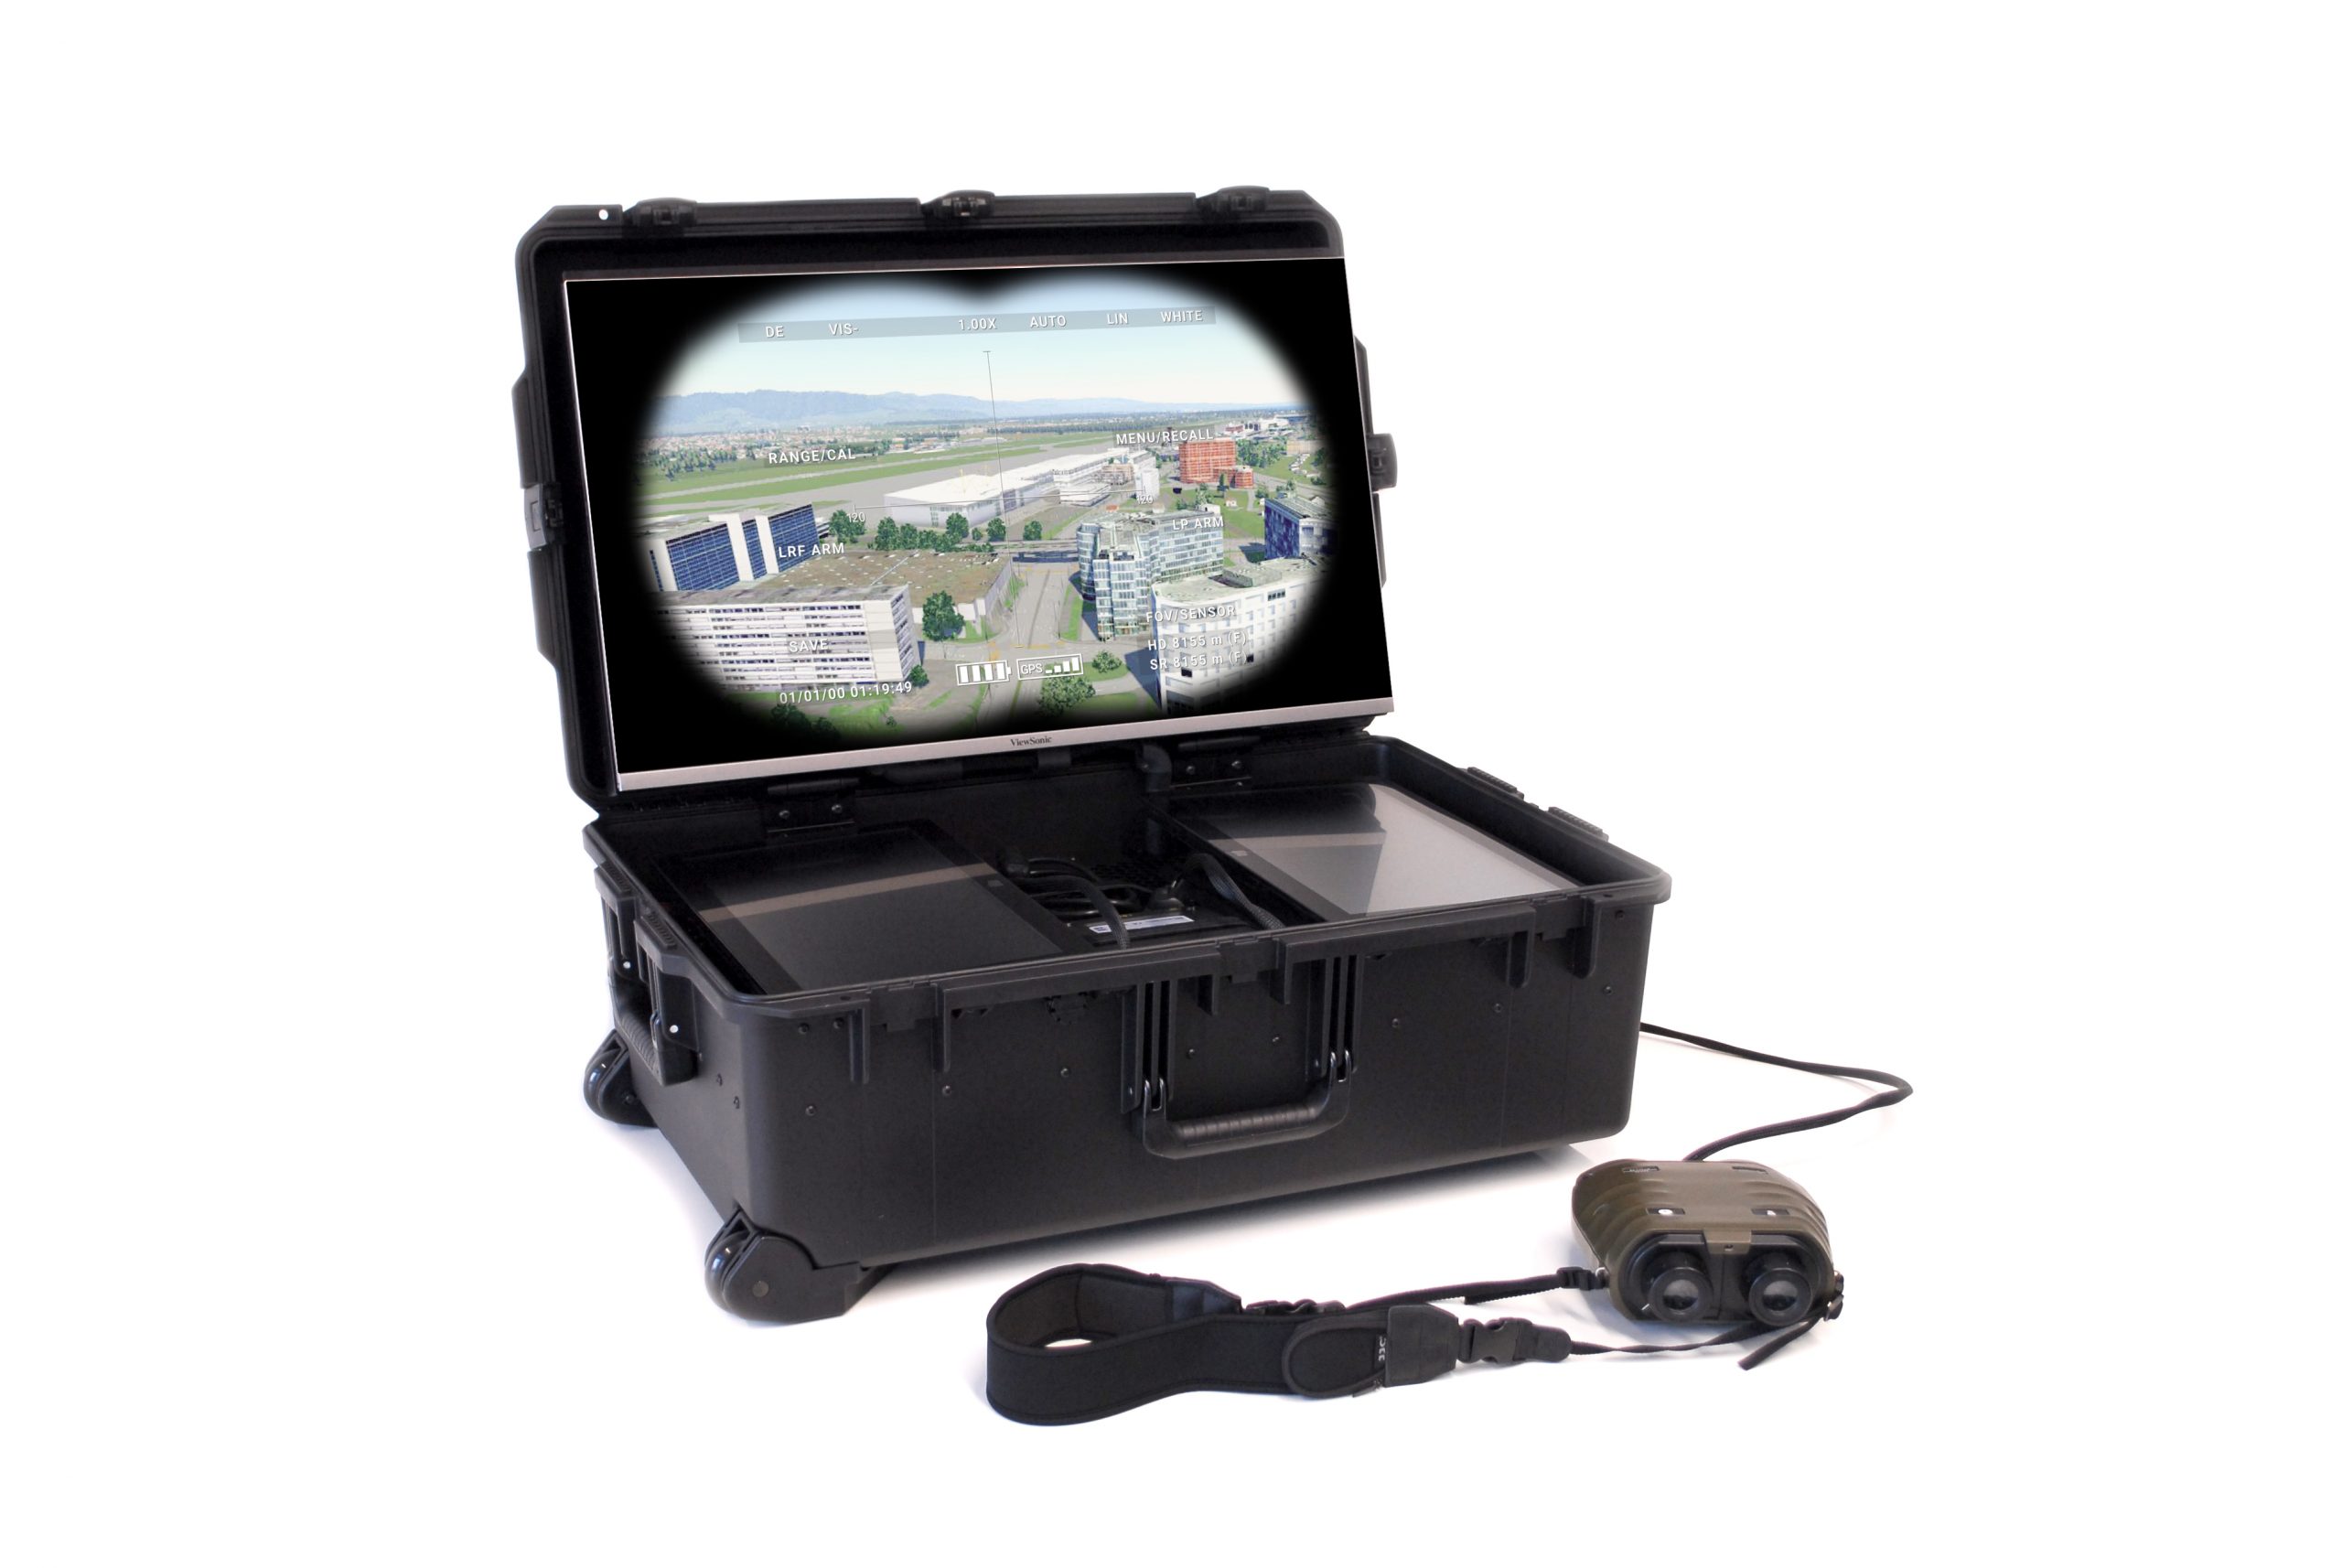 <p>MiniJOBSS includes replications of actual military equipment (SME), including their functionality. SME software replicates the menus, overlays, measurements, and measuring algorithms of real military equipment.</p>
